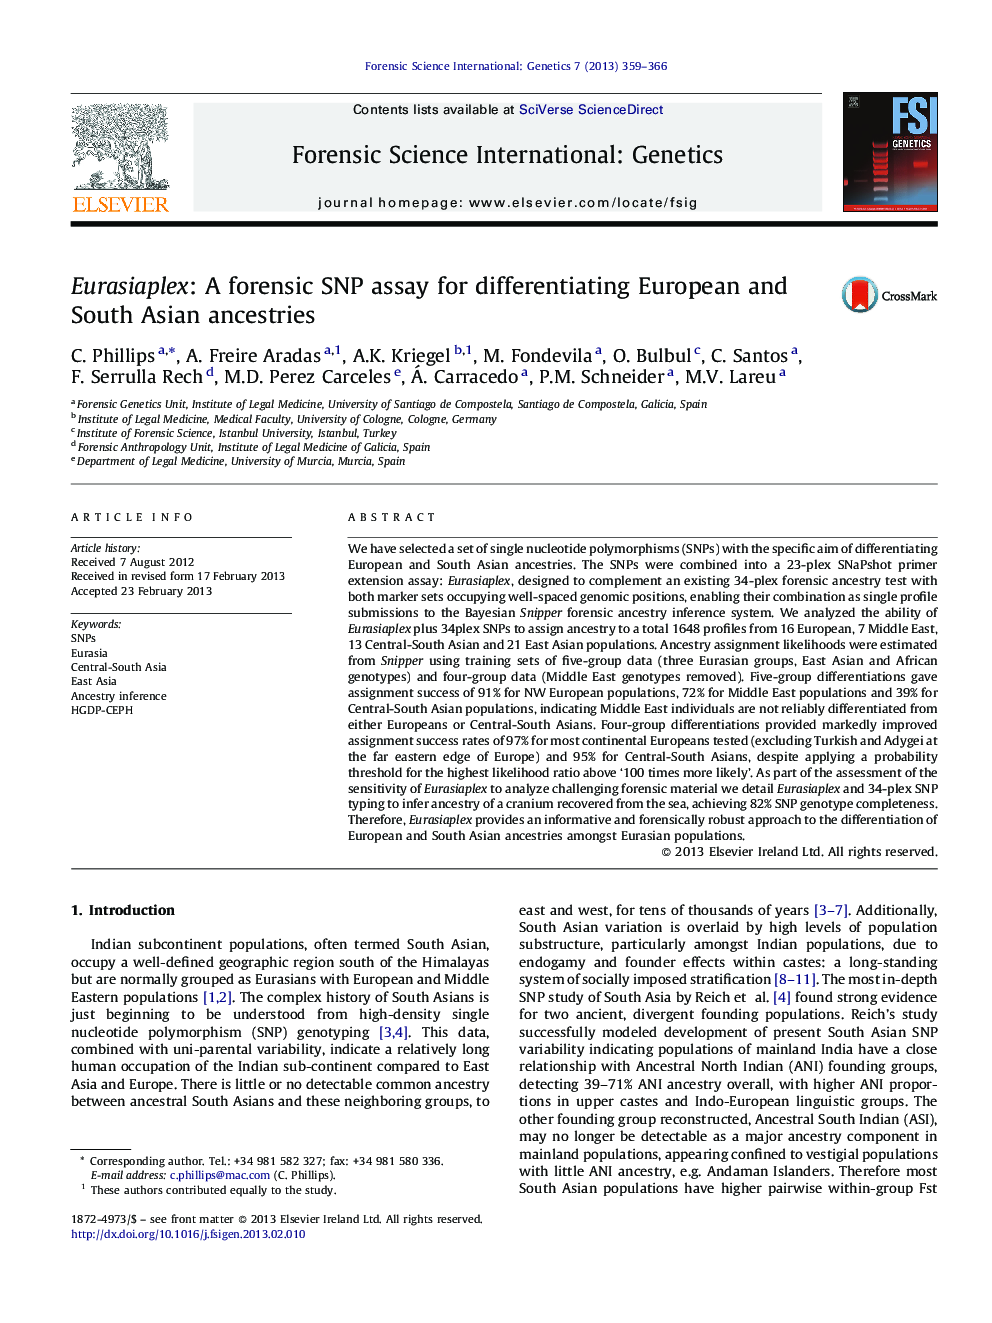 Eurasiaplex: A forensic SNP assay for differentiating European and South Asian ancestries